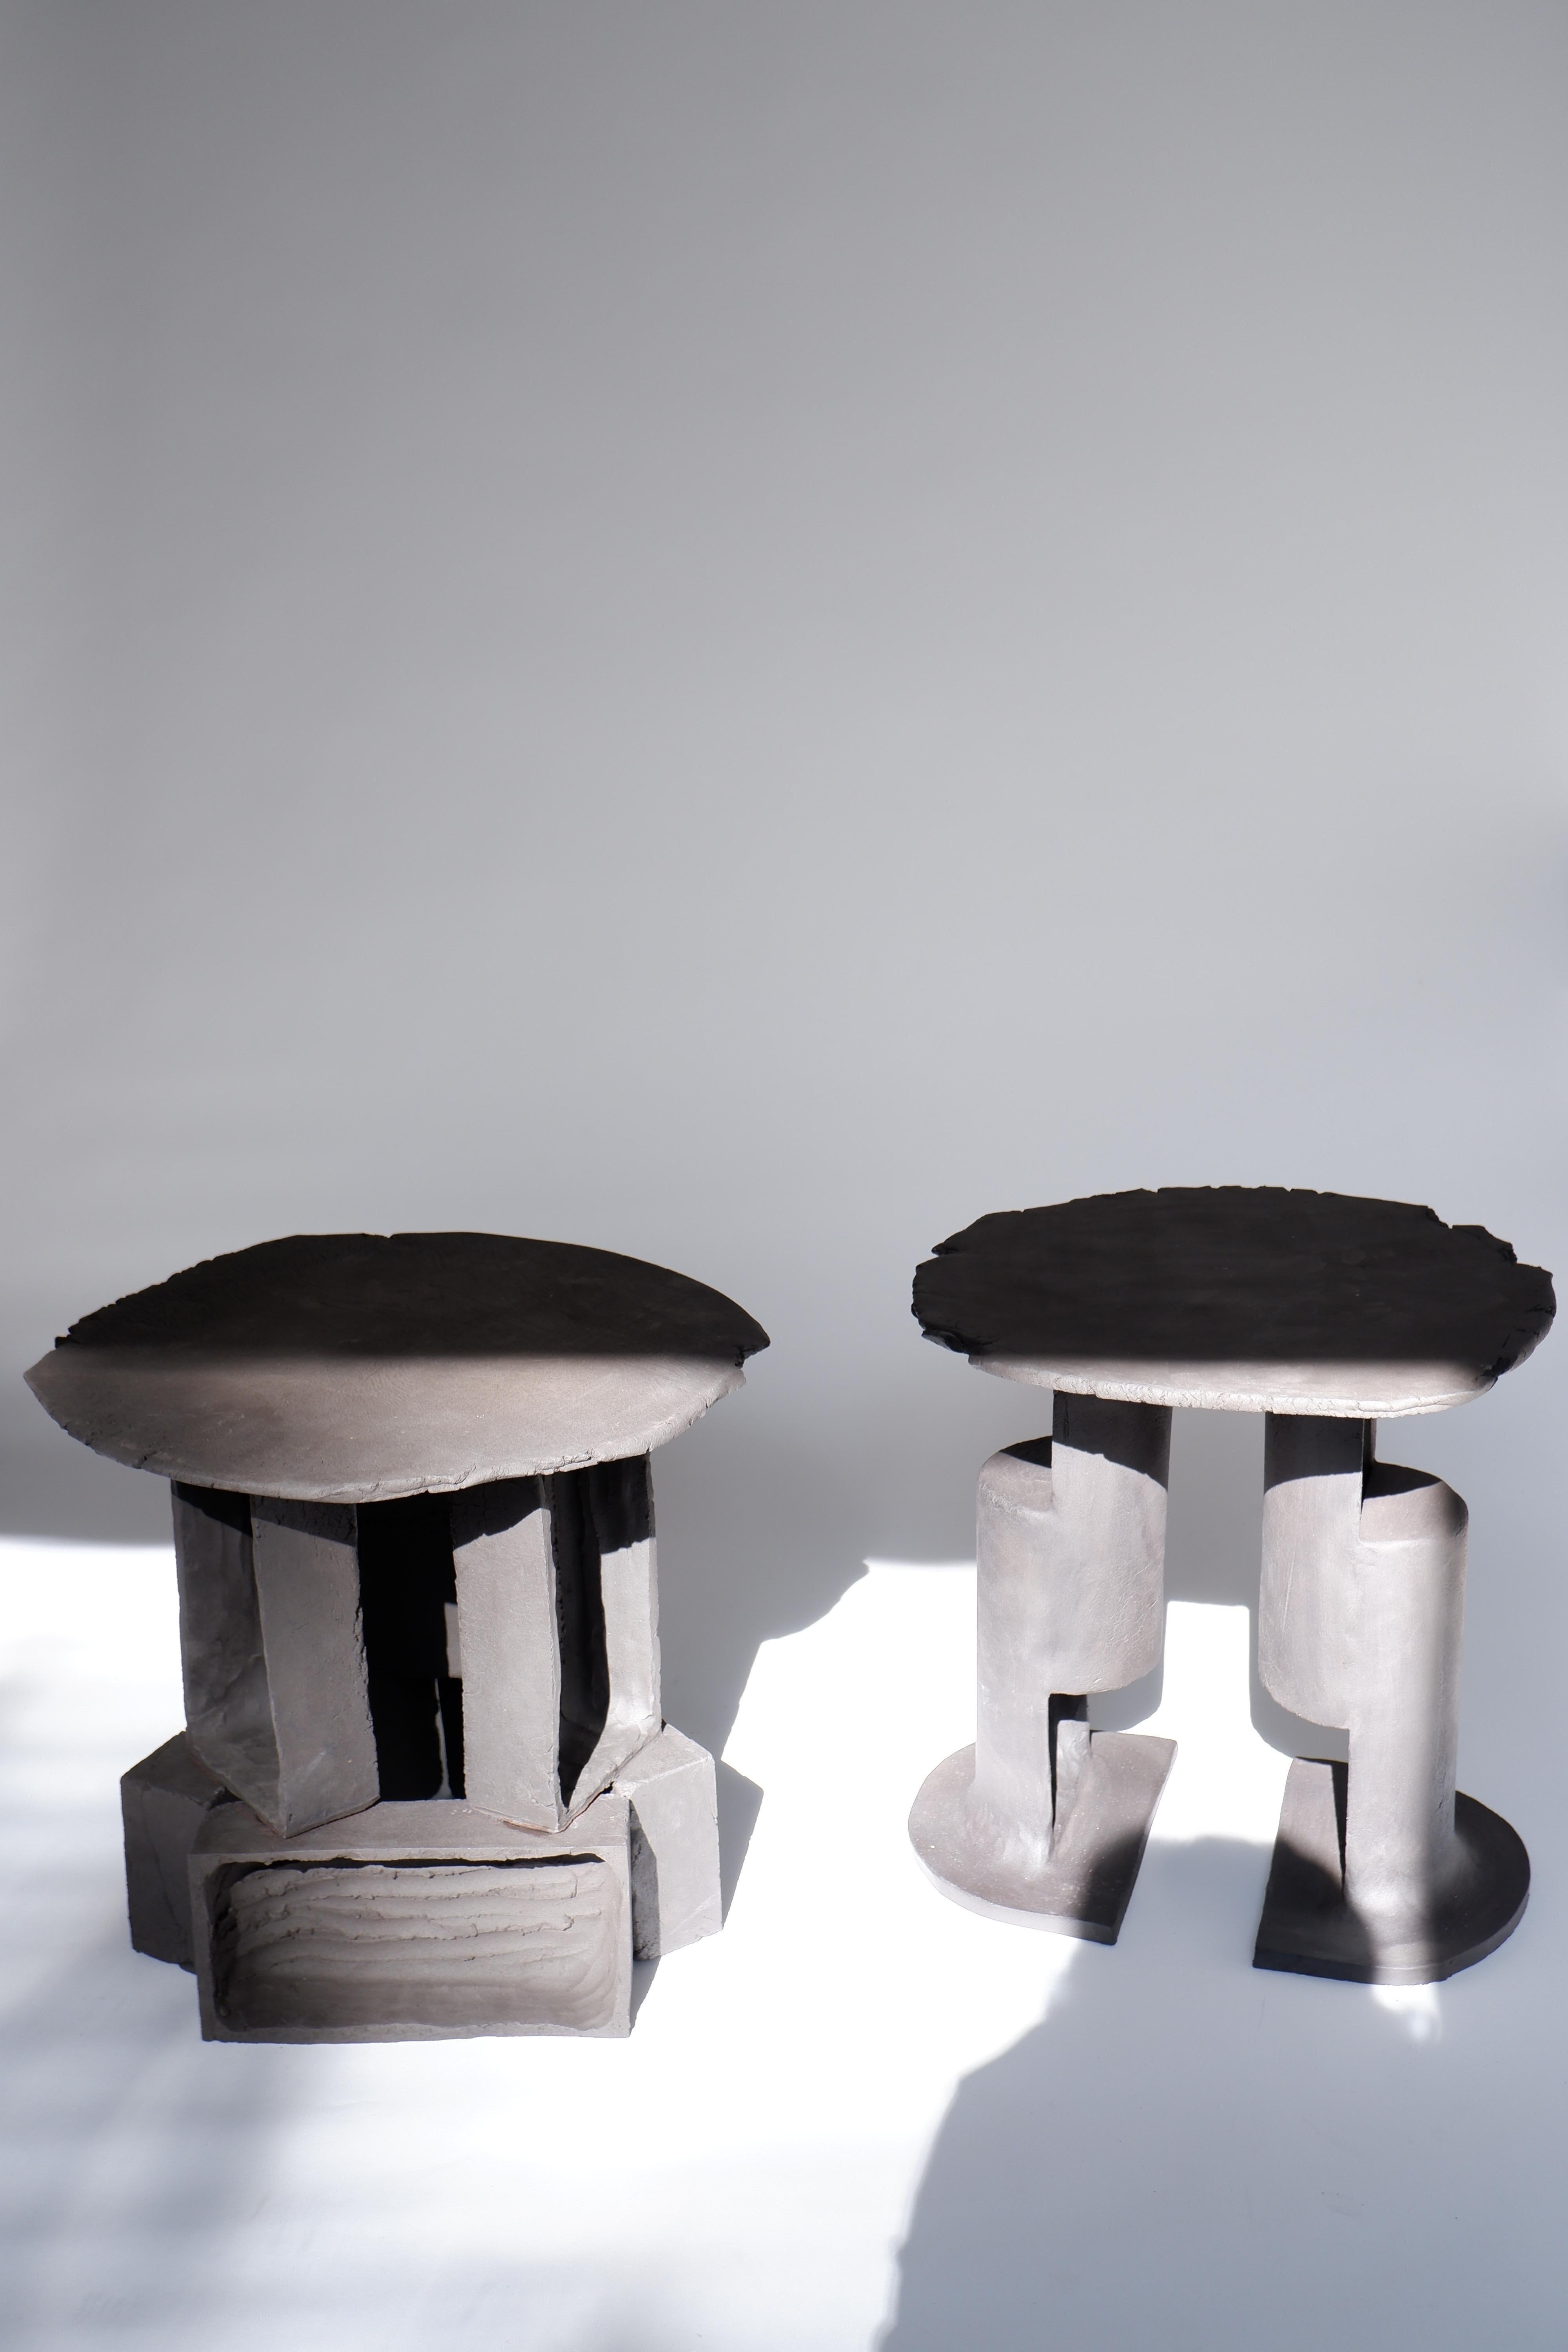 Set Of 2 T01 And T02 Coffee Tables by Ia Kutateladze
One Of  A Kind.
Dimensions: D 38 x H 37 cm (each).
Materials: Black clay.

Each piece is one of a kind, due to its free hand-building process. The top is always irregular and one of a kind.